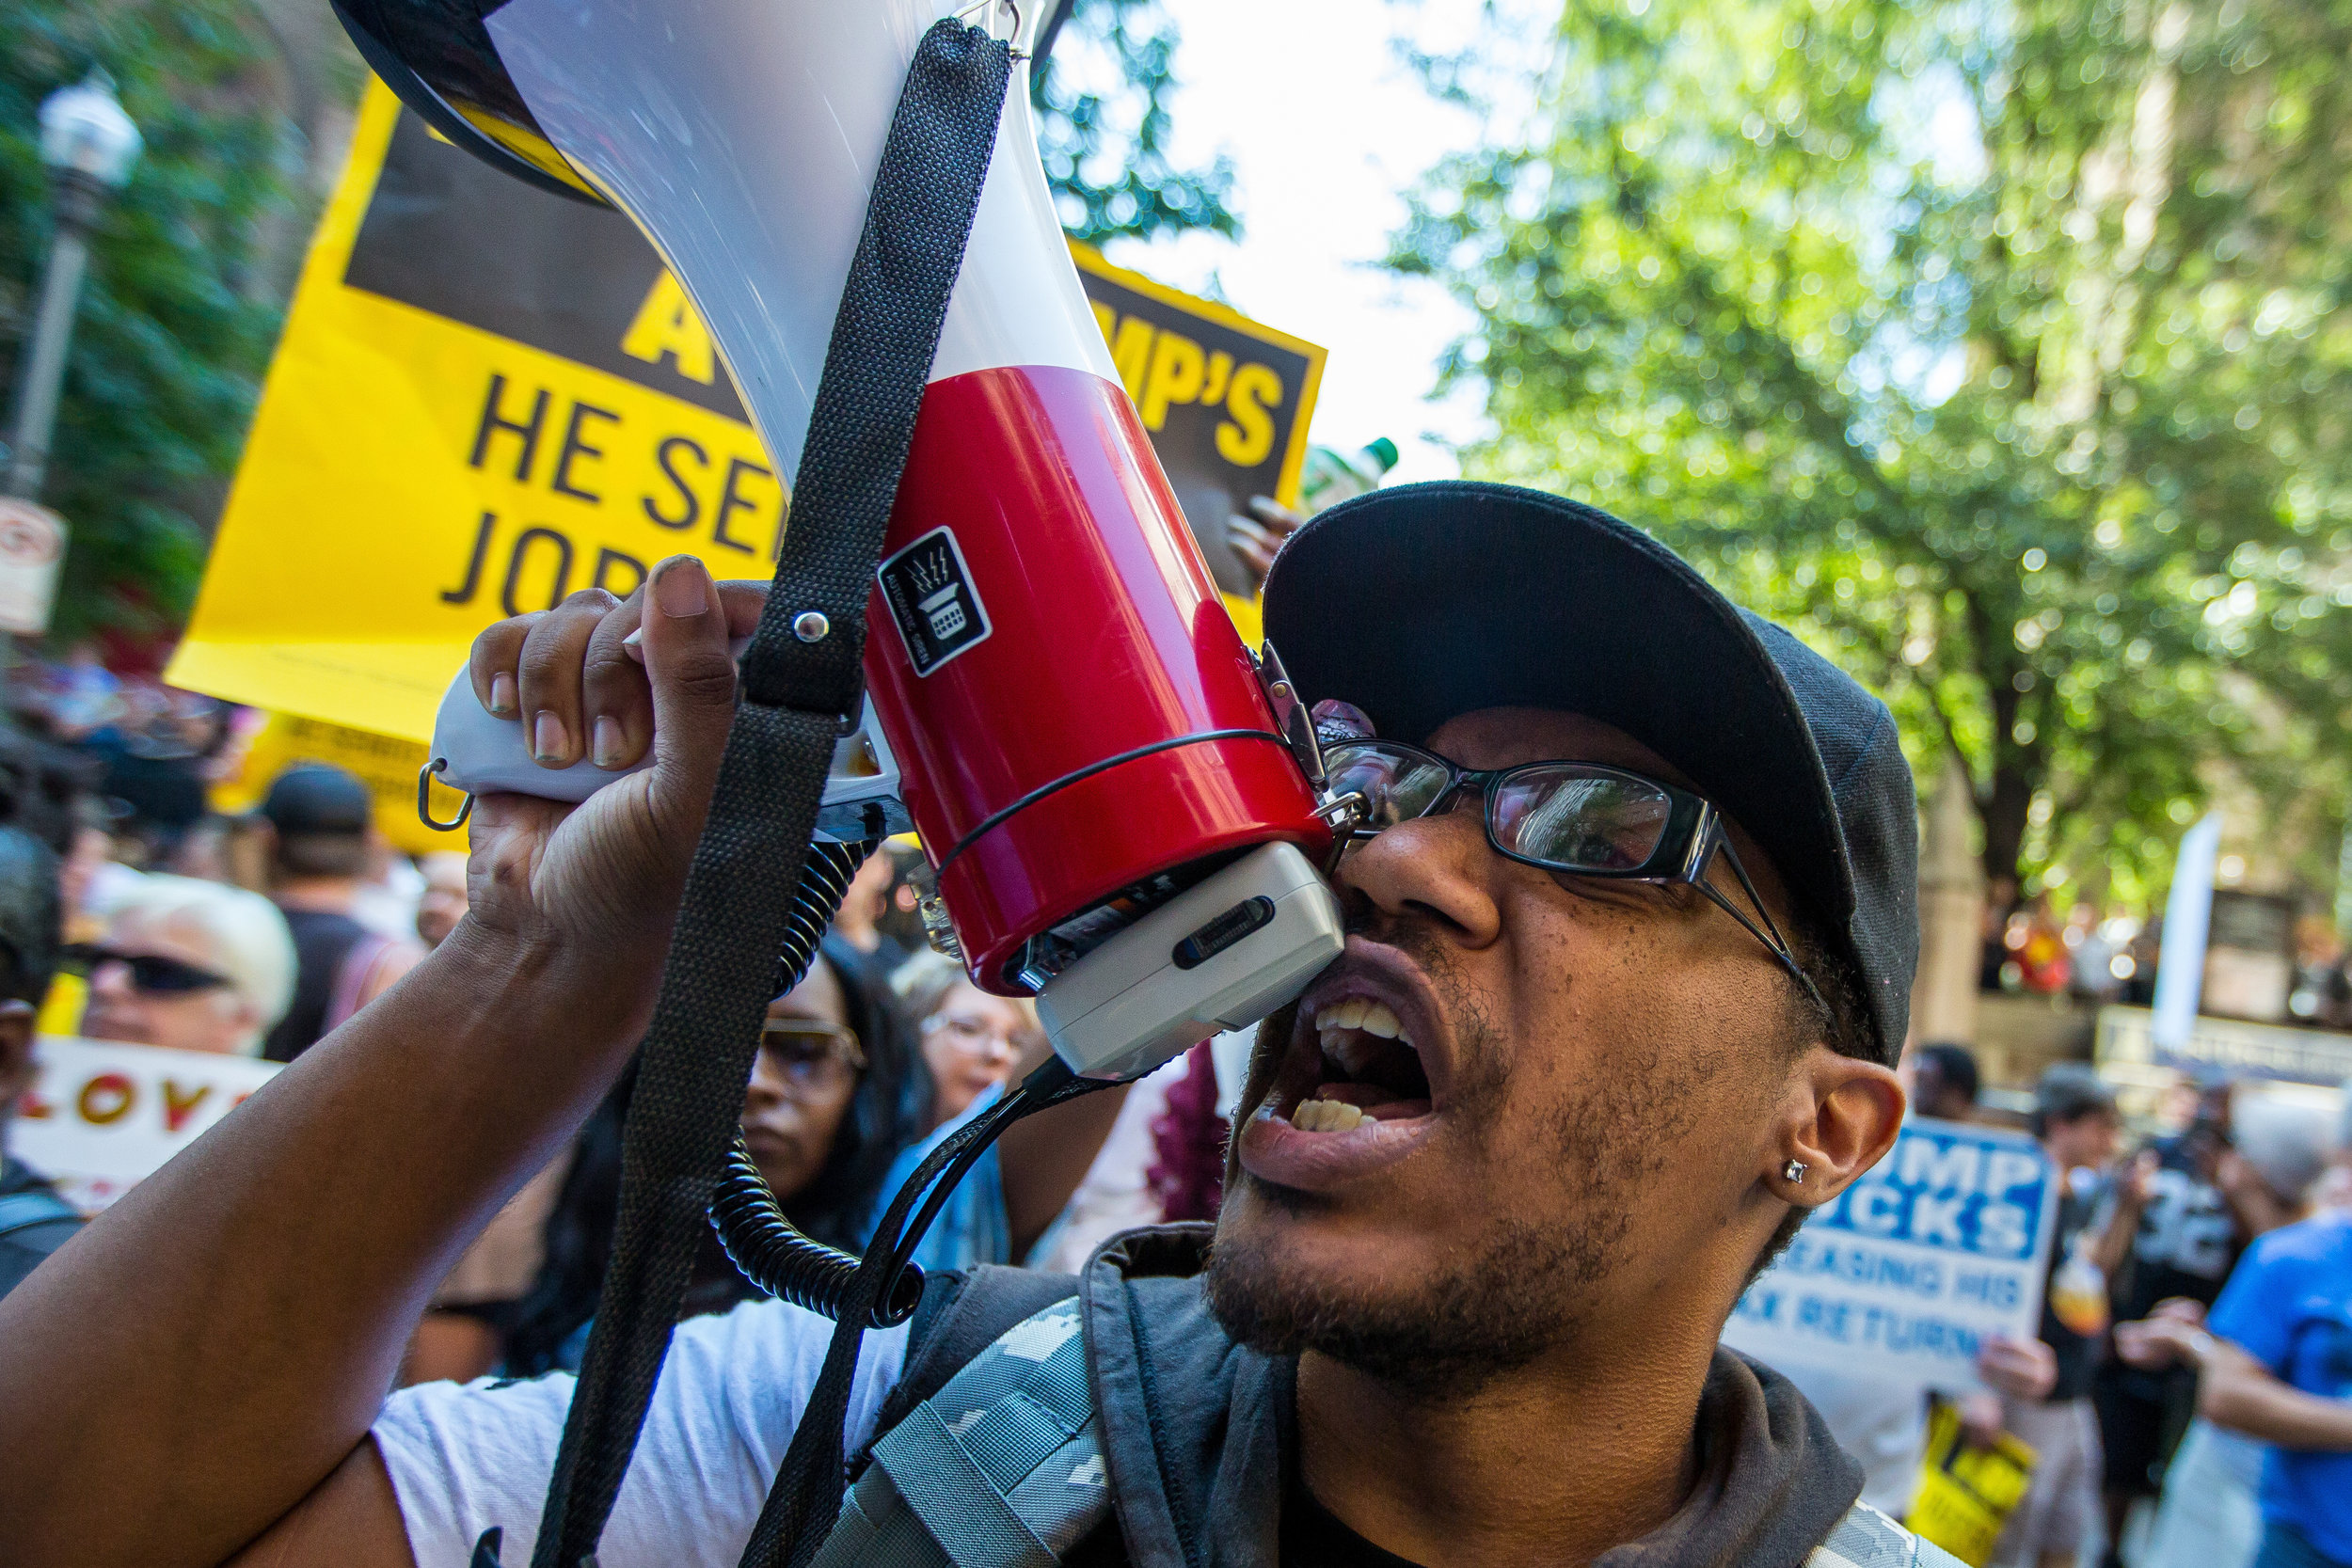  Chris Ellix, of Northside, yells into a megaphone while protesting outside of the Duquesne Club on Sixth Ave. in Pittsburgh on Thursday afternoon. The protest took place after Republican Presidential nominee Donald Trump had lunch at the Duquesne Cl